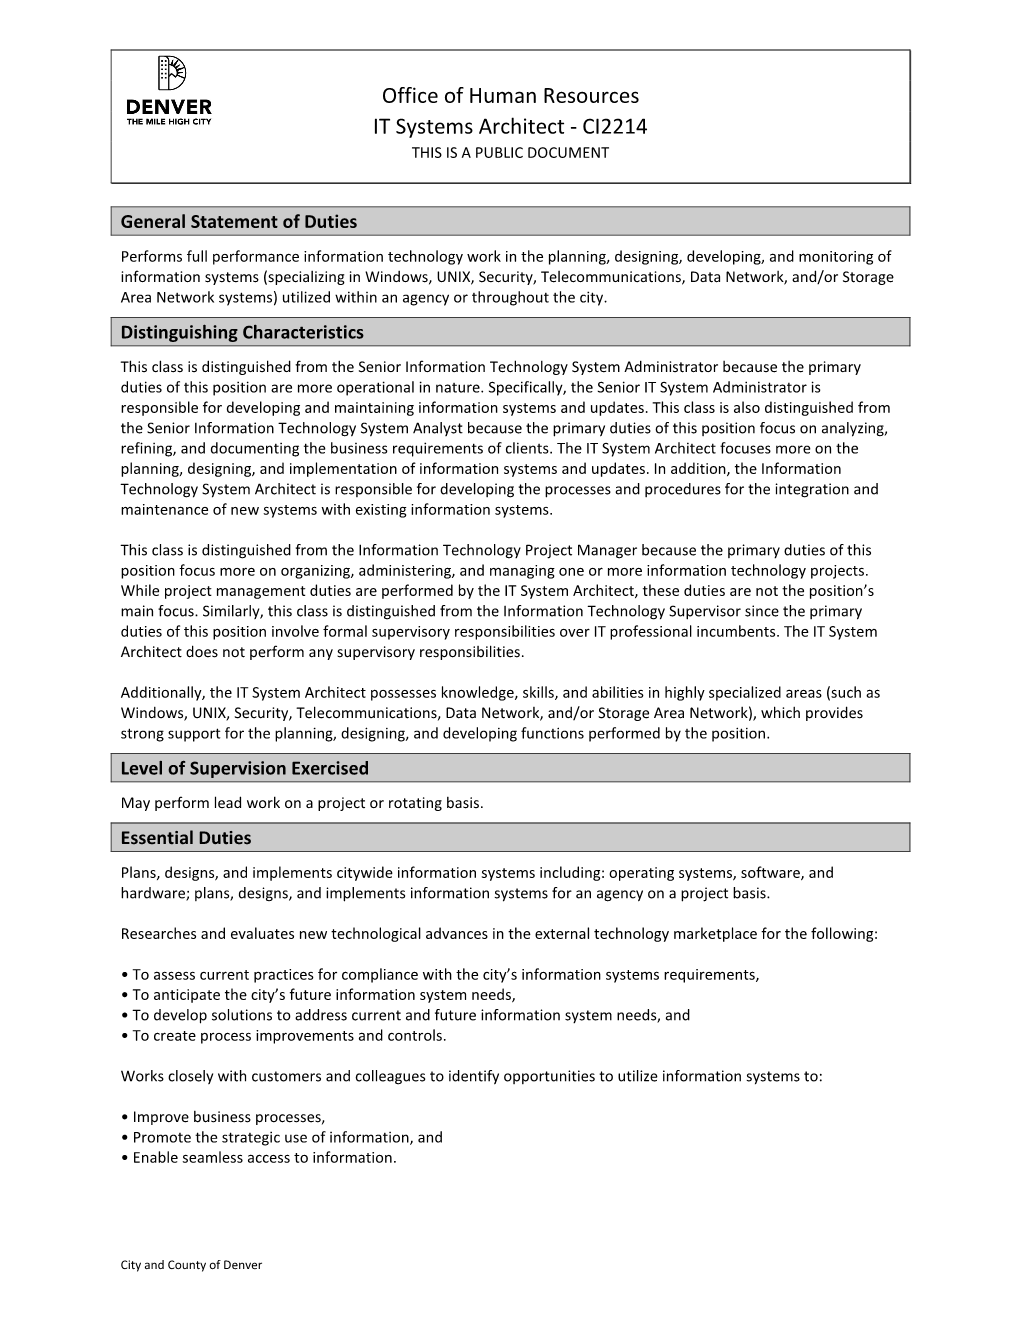 Office of Human Resources IT Systems Architect - CI2214 THIS IS a PUBLIC DOCUMENT